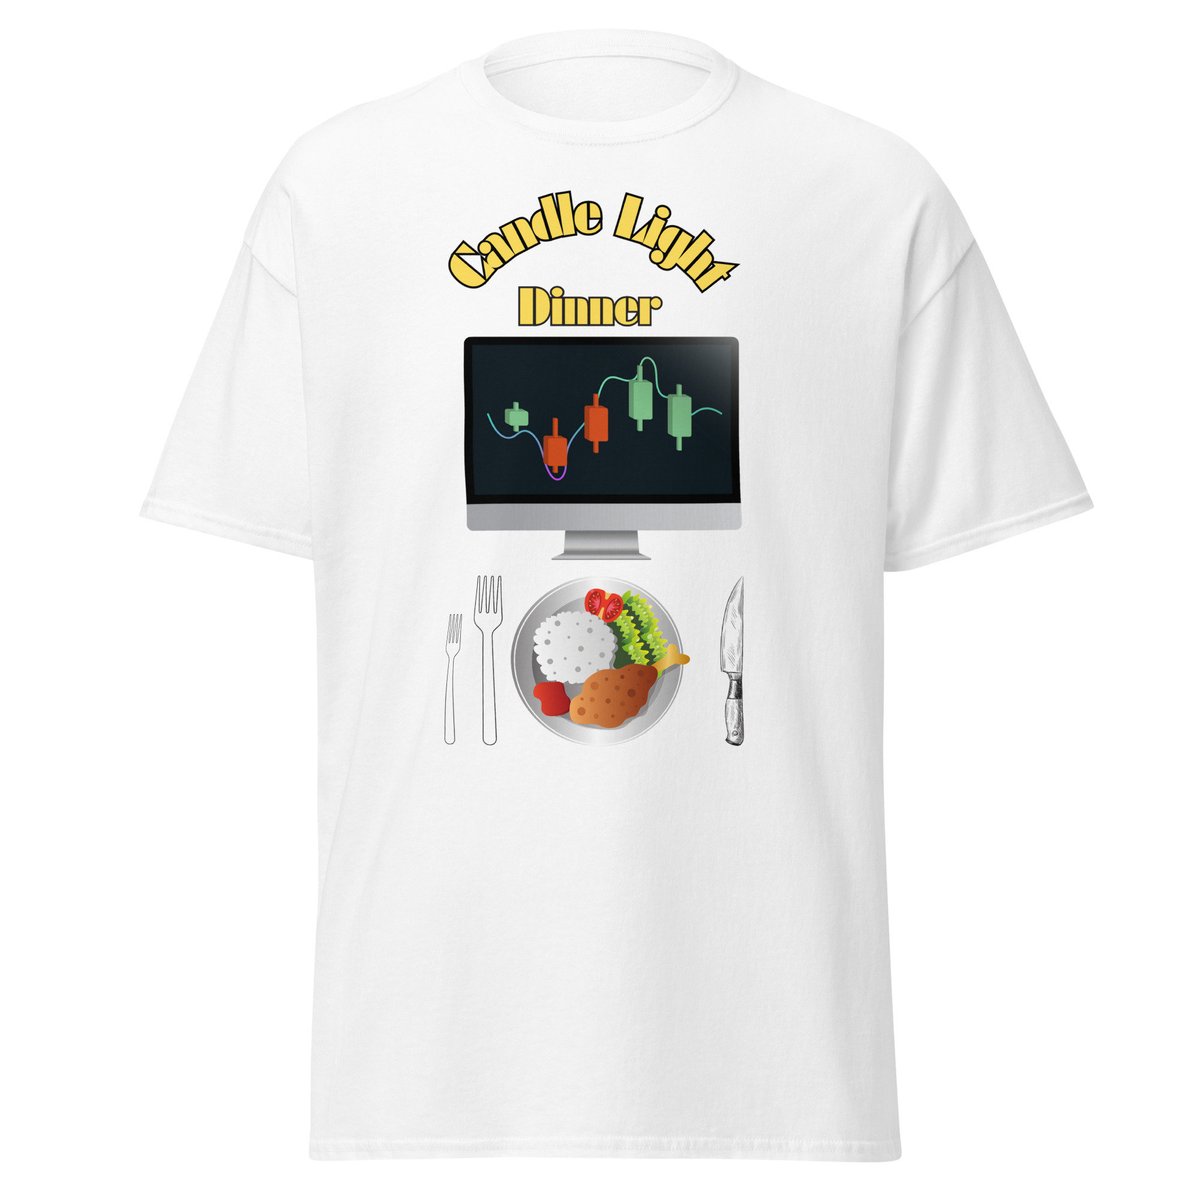 Excited to share the latest addition to my #etsy shop: Men's classic trading tee 24.99 Free US Shipping etsy.me/43EU1F1 #daytrading #cryptotraders #currencytraders #tradingtshirt #biggestwinners #biggestlosers #tradingfordinner #moneyshirts #stocktraders